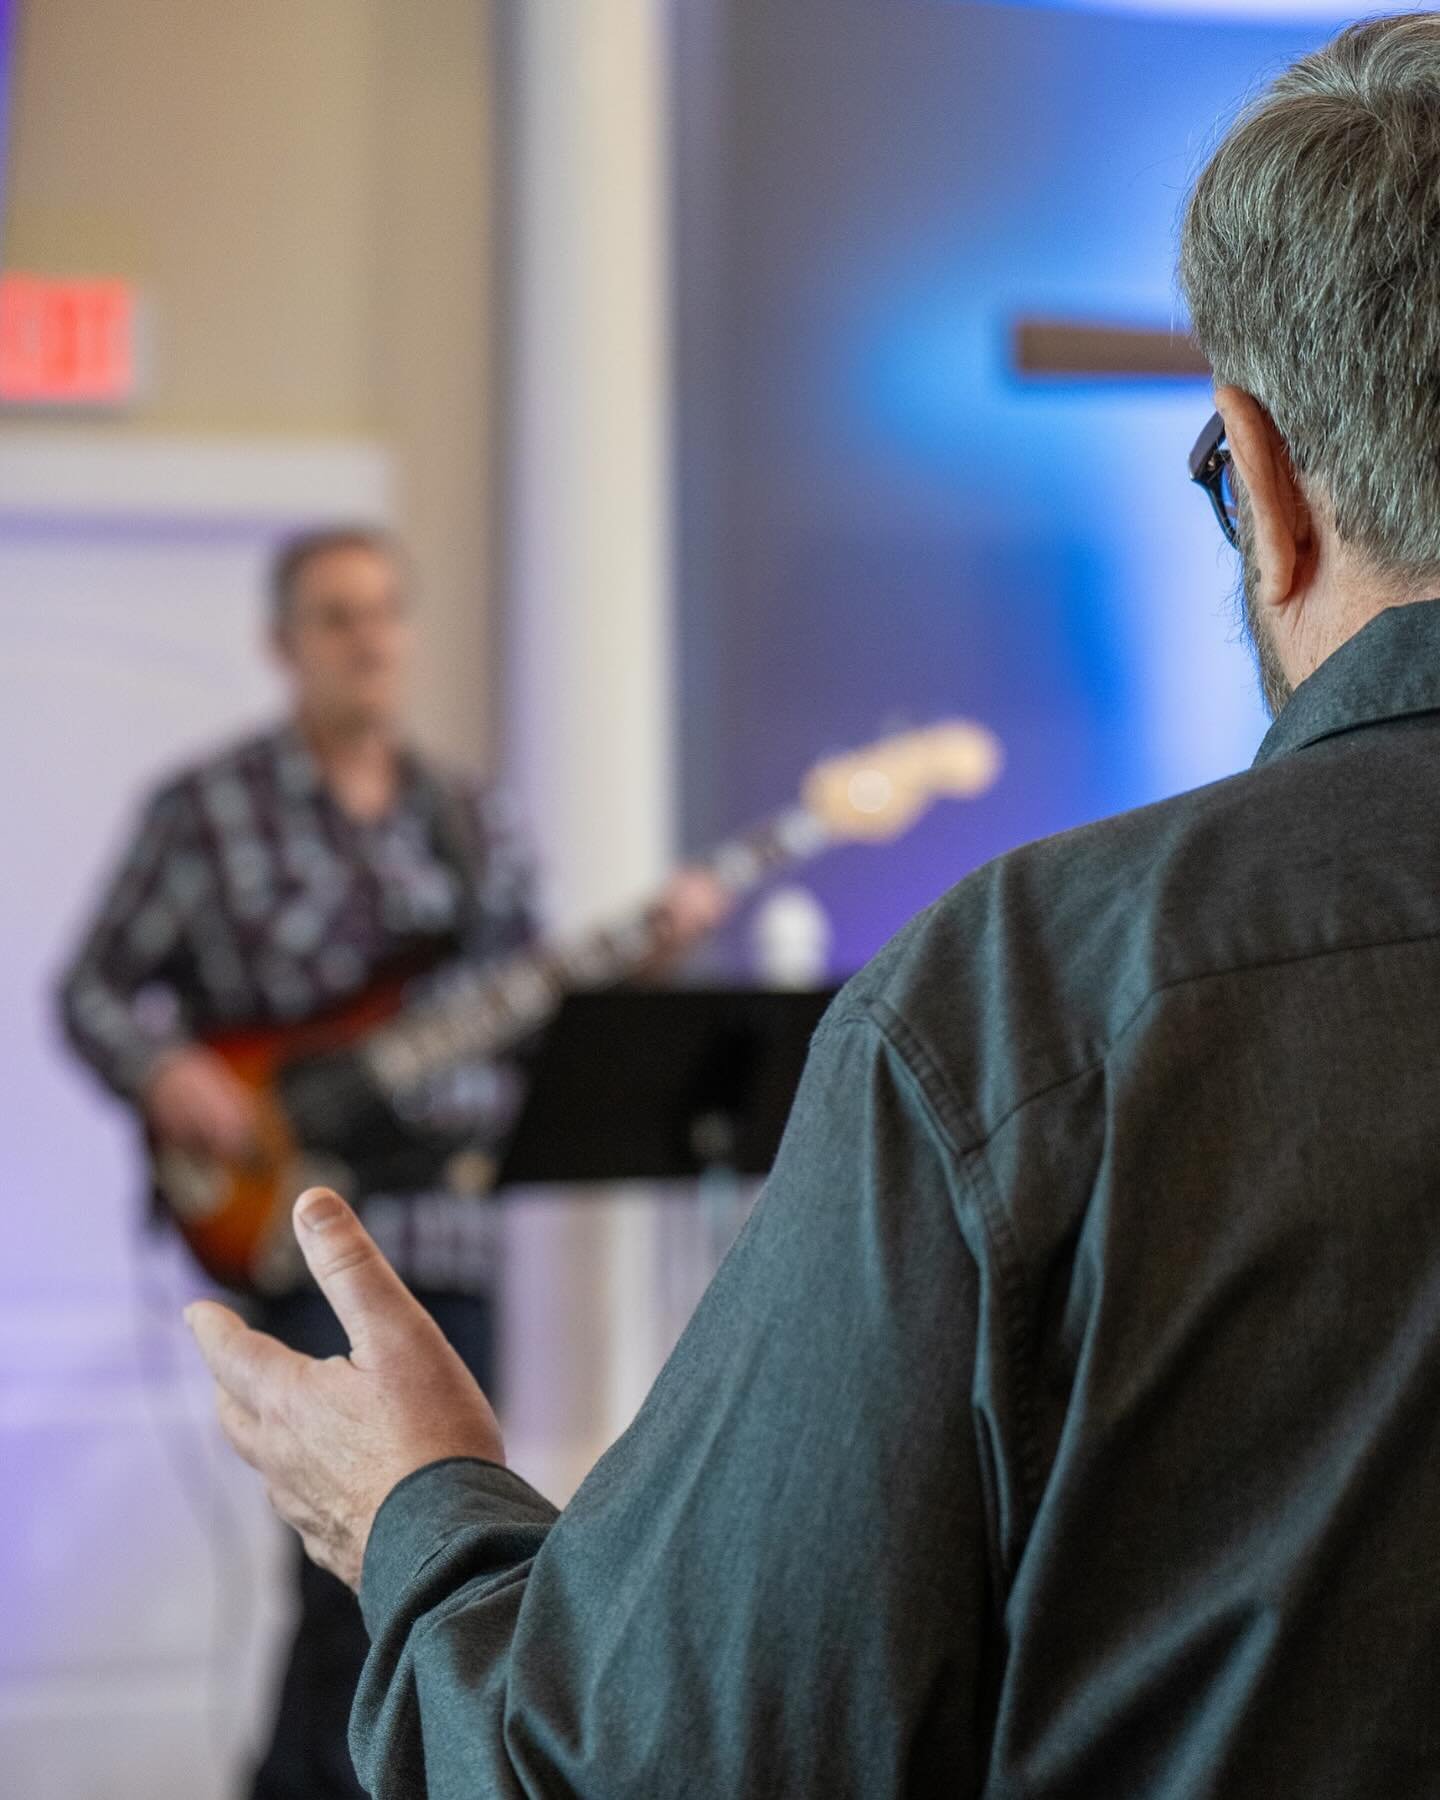 Looking to connect with other families and explore faith in a warm and welcoming environment? We&rsquo;d love for you to join us this Sunday! Our services starts at 8:30 &amp; 10:30 and we have engaging programs for all ages, including a vibrant chil